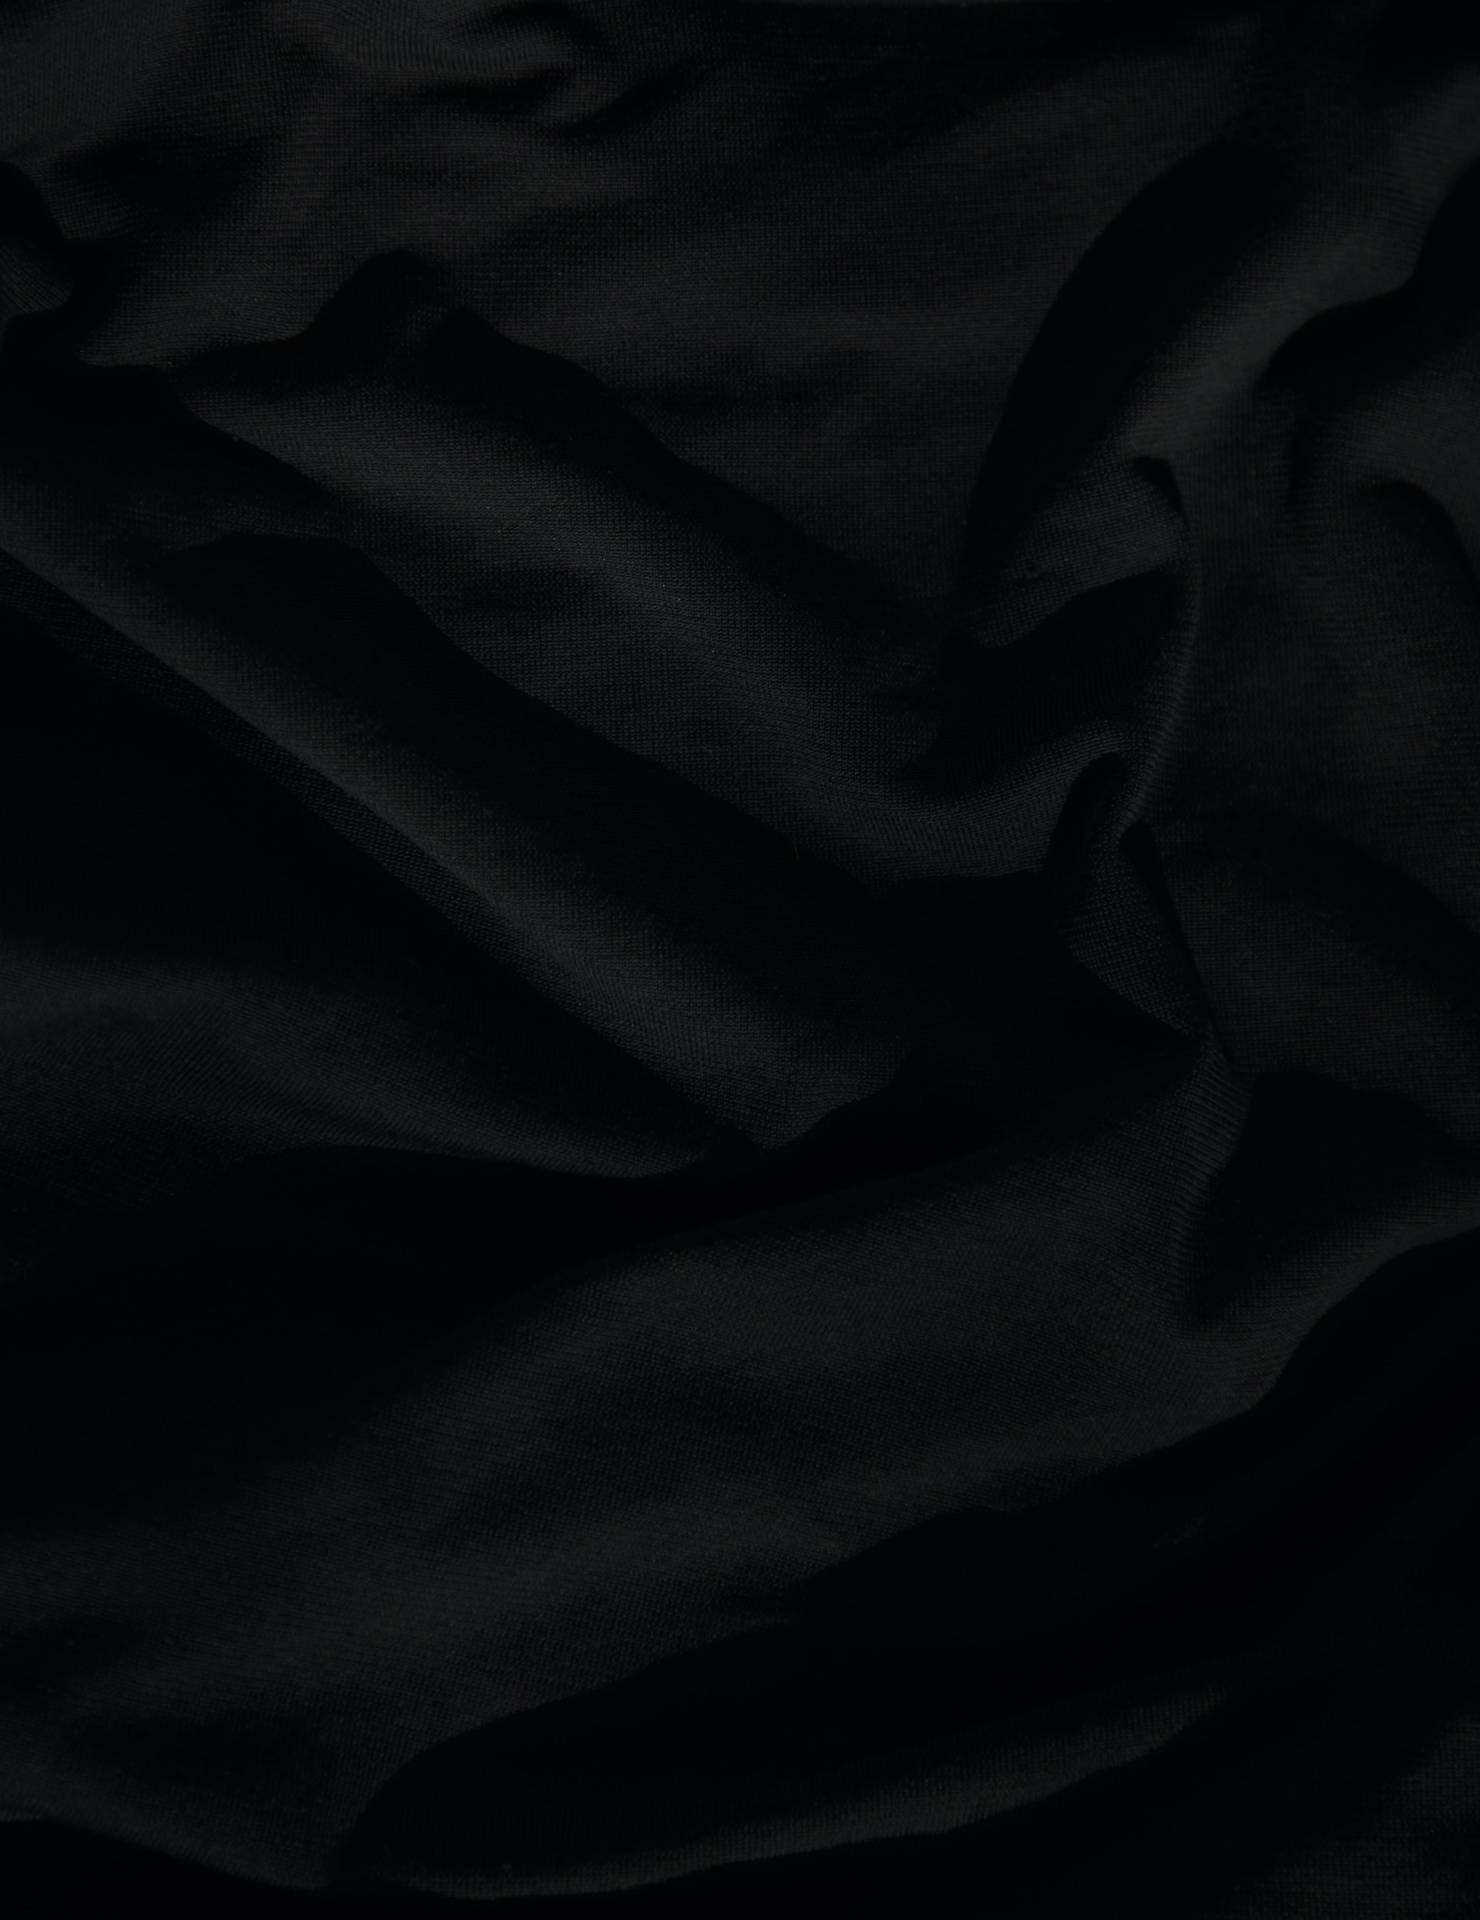 Rayon Cloth Black Aesthetic Tumblr Iphone Background